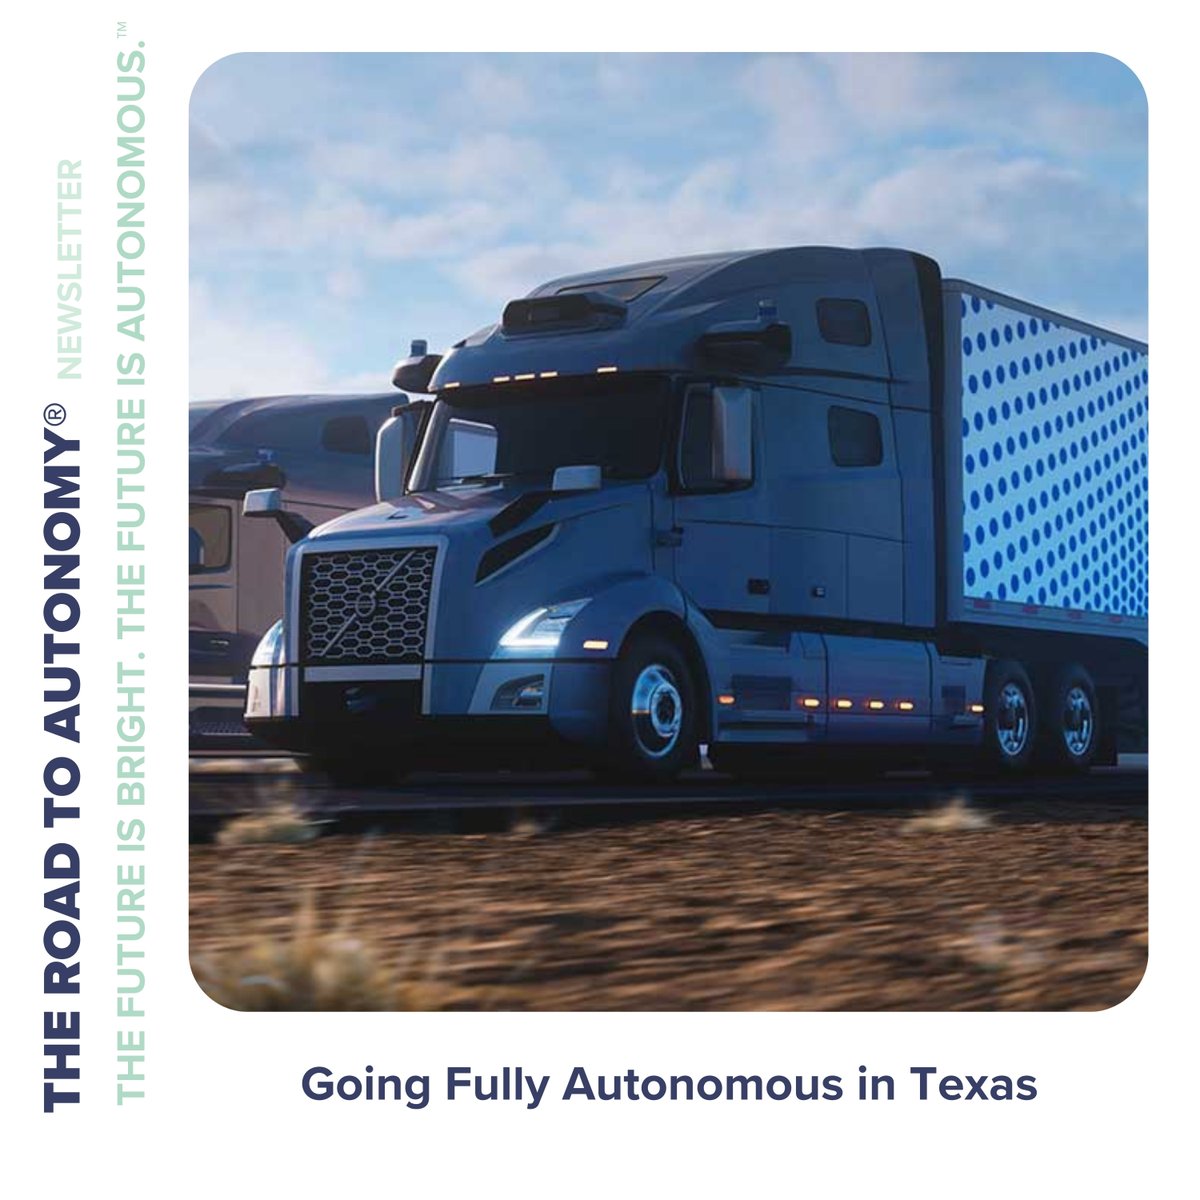 Going Fully Autonomous in Texas This Week in The Autonomy Economy, The Road to Autonomy Index declined 0.96%, @Aurora_Inno and @KodiakRobotics are preparing to go fully autonomous in Texas, @Walmart opened their optimization software to 3rd parties and @Apple is looking to pivot